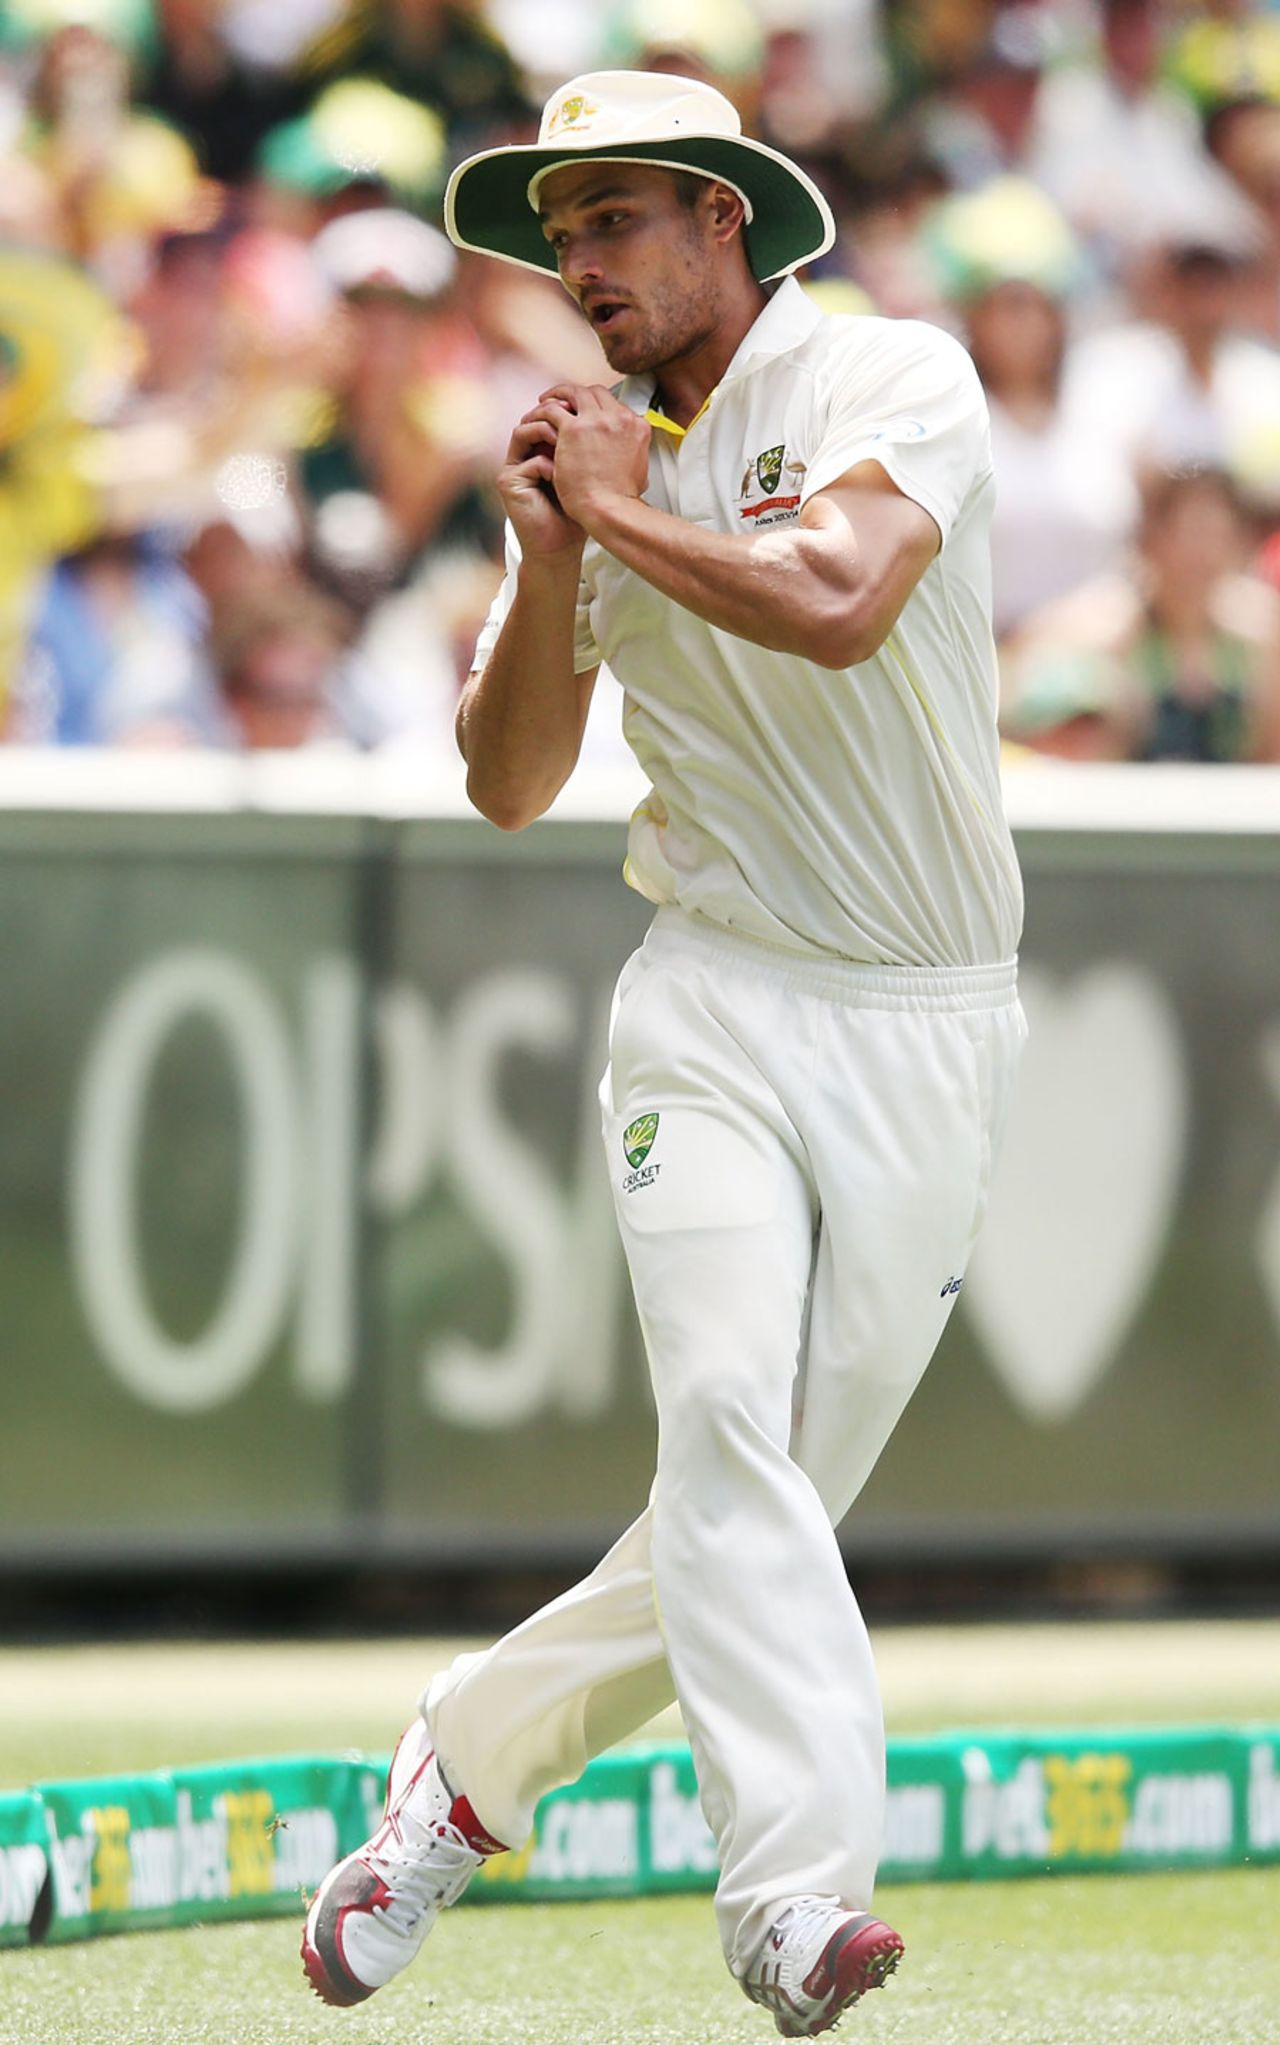 Nathan Coulter-Nile clutched hold of Kevin Pietersen's pull shot, Australia v England, 4th Test, Melbourne, 1st day, December 26, 2013